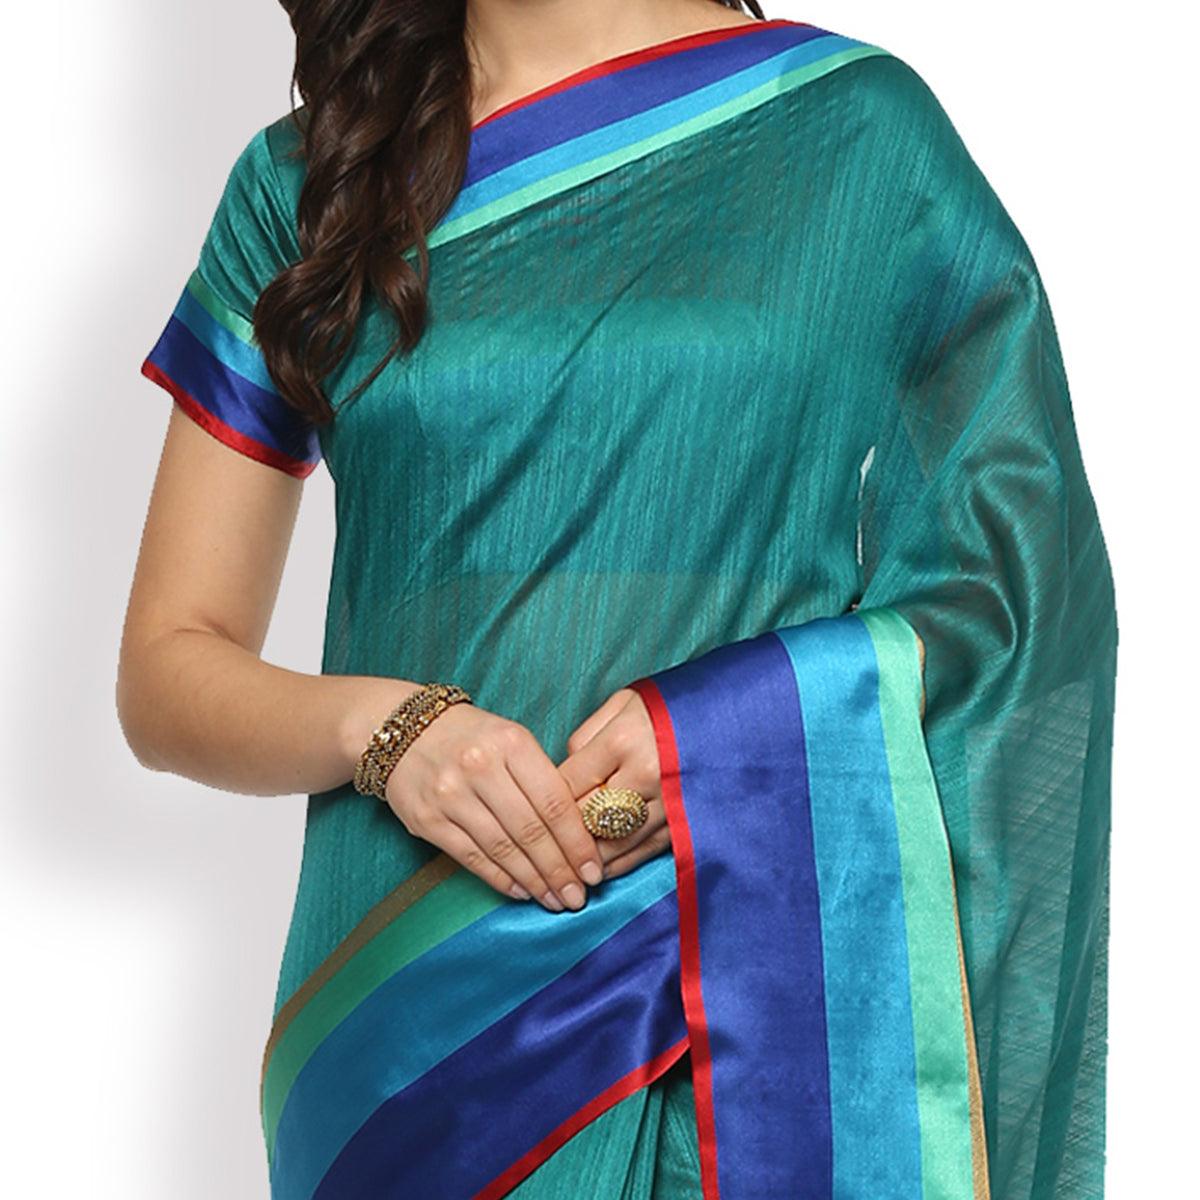 Charming Turquoise Green Colored Festive Wear Cotton Weaving Saree - Peachmode